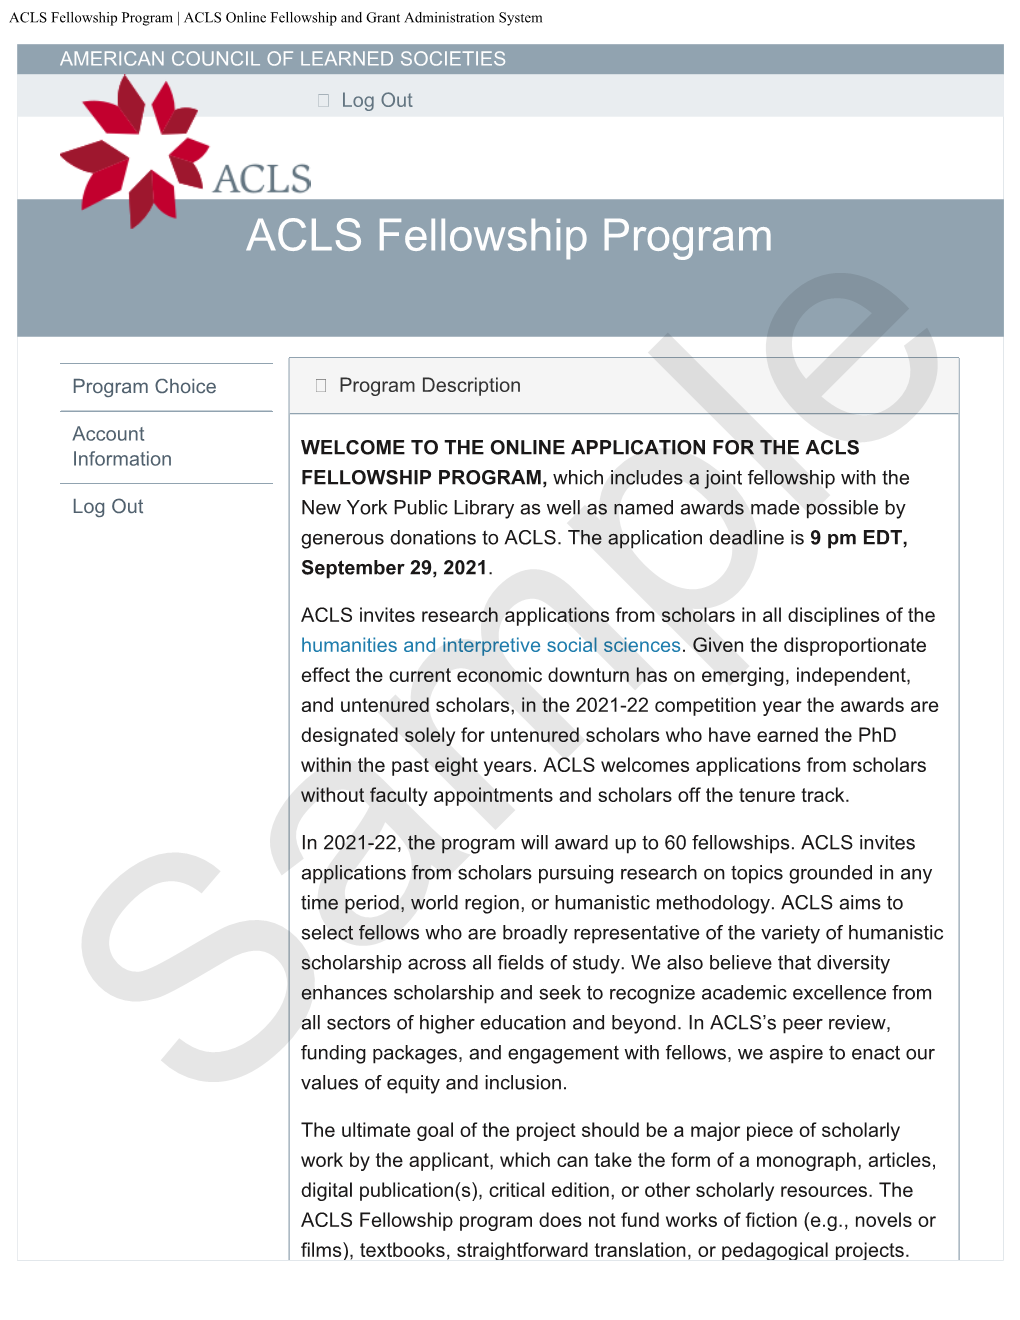 ACLS Fellowship Program | ACLS Online Fellowship and Grant Administration System